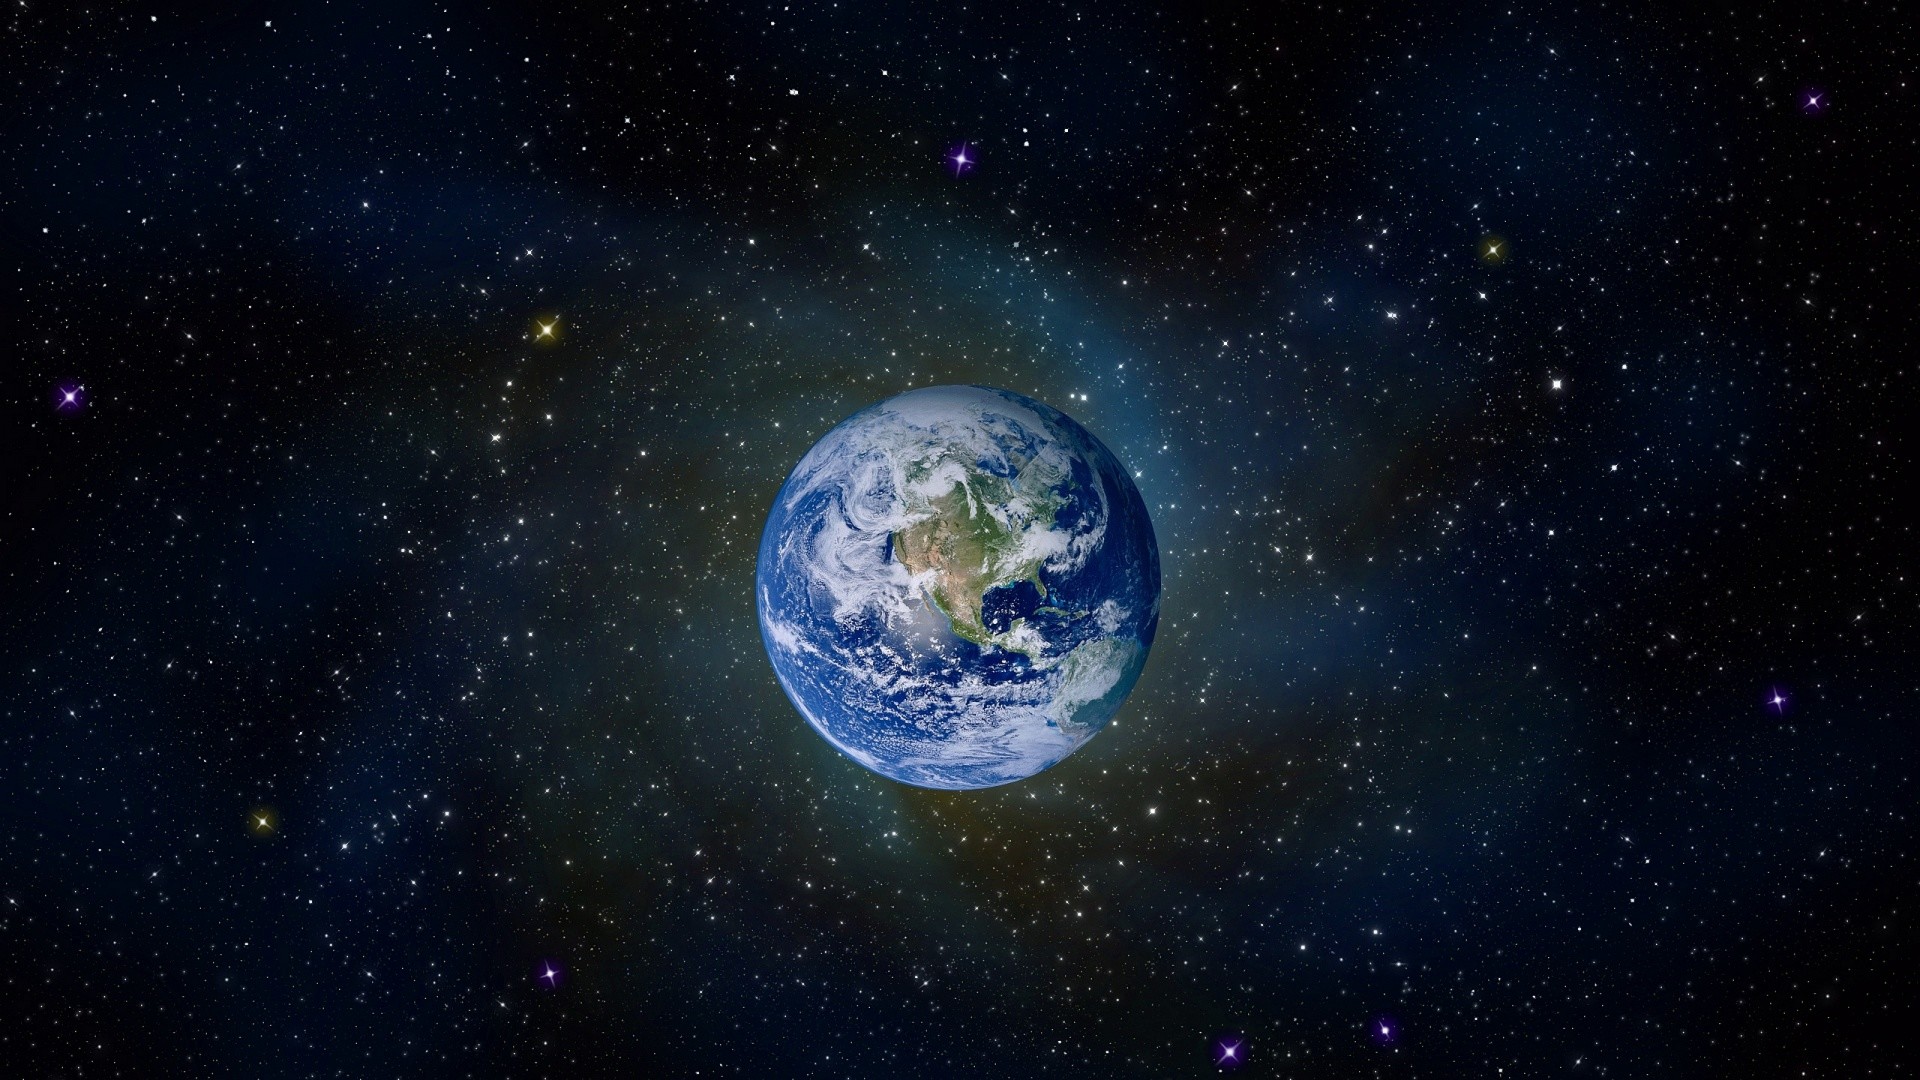 Hd Wallpapers 1080p Earth The earth wallpaper